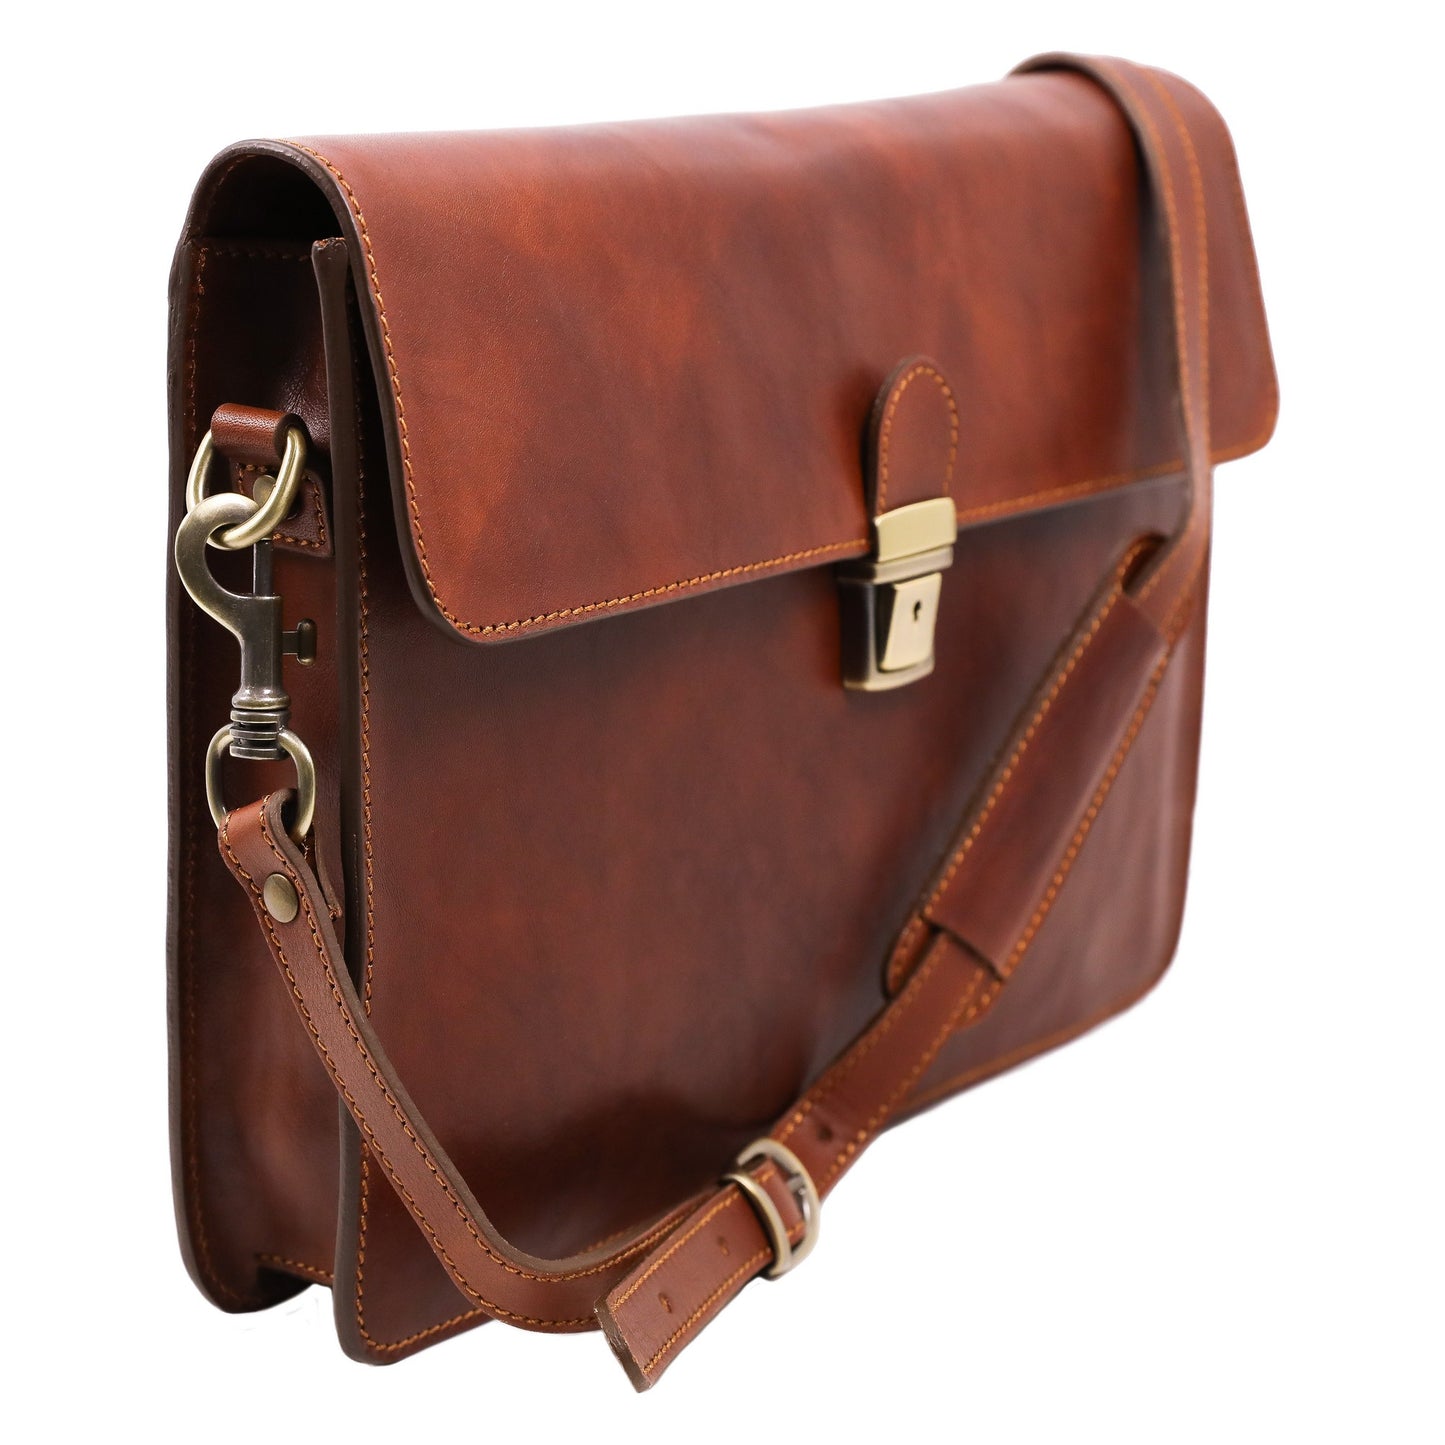 Leather Portfolio, Work Bag with Shoulder Strap  - The Corrections